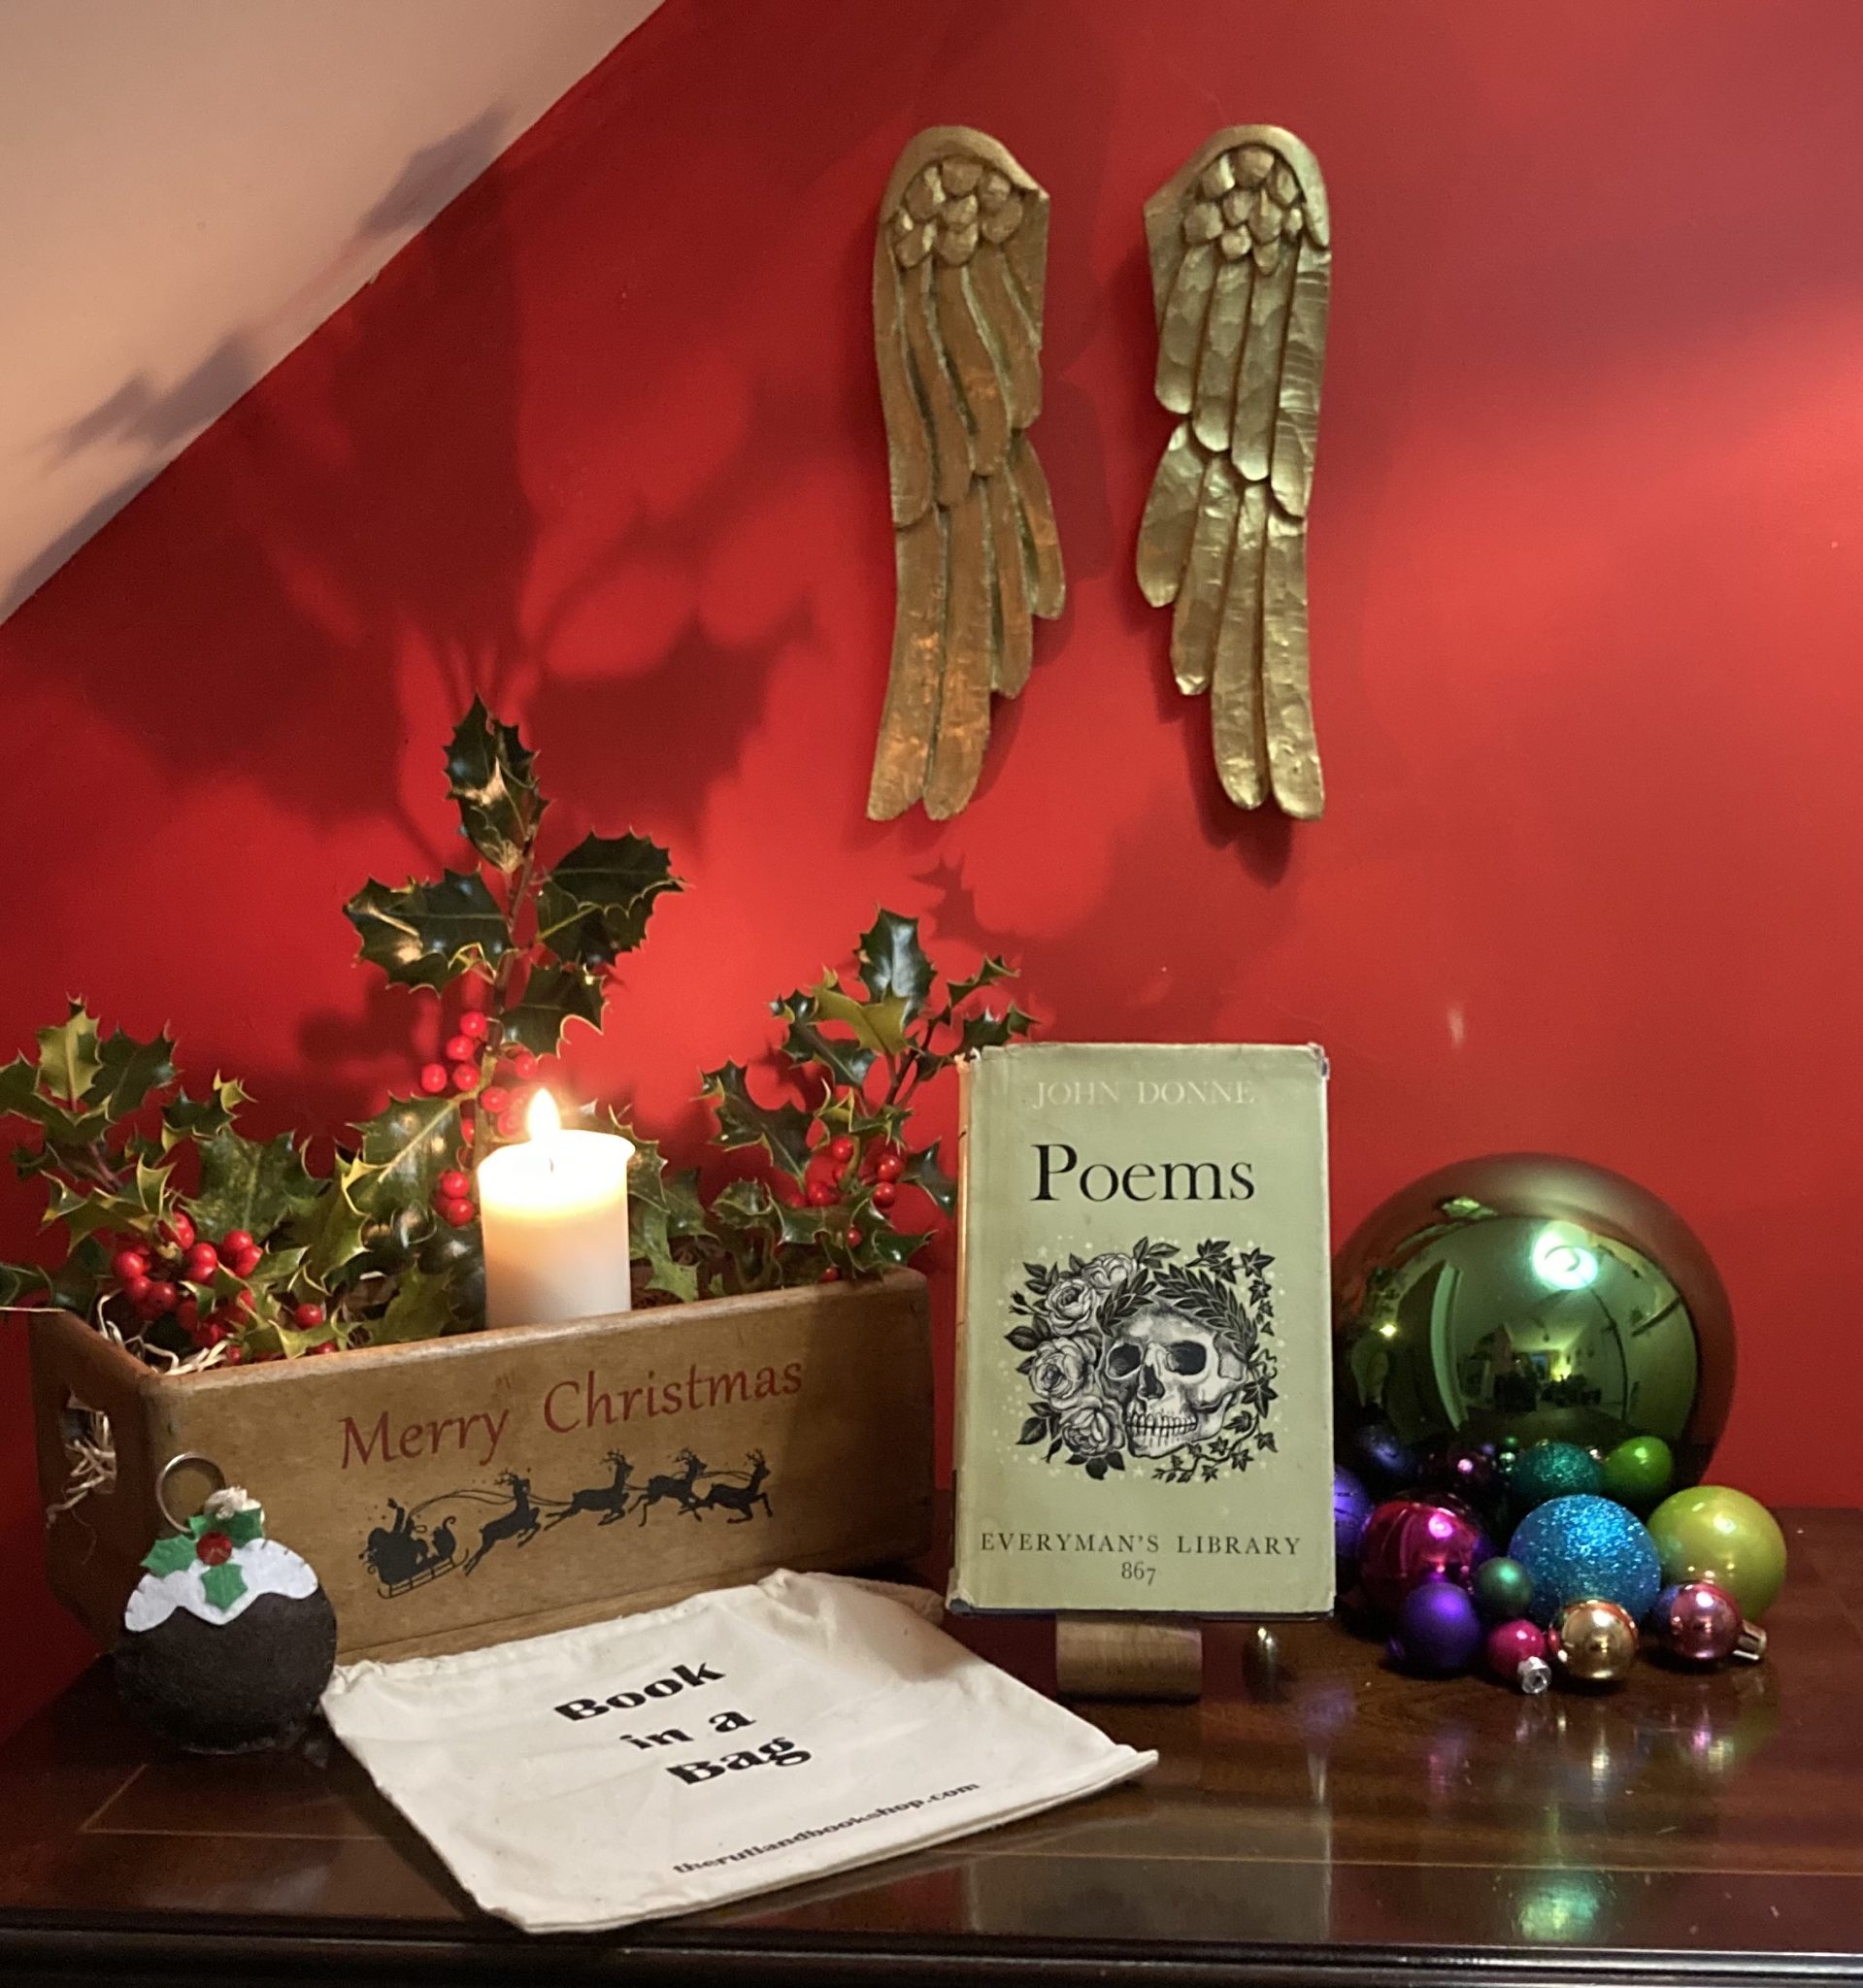 Christmas Book in a Bag: Donne the Poems